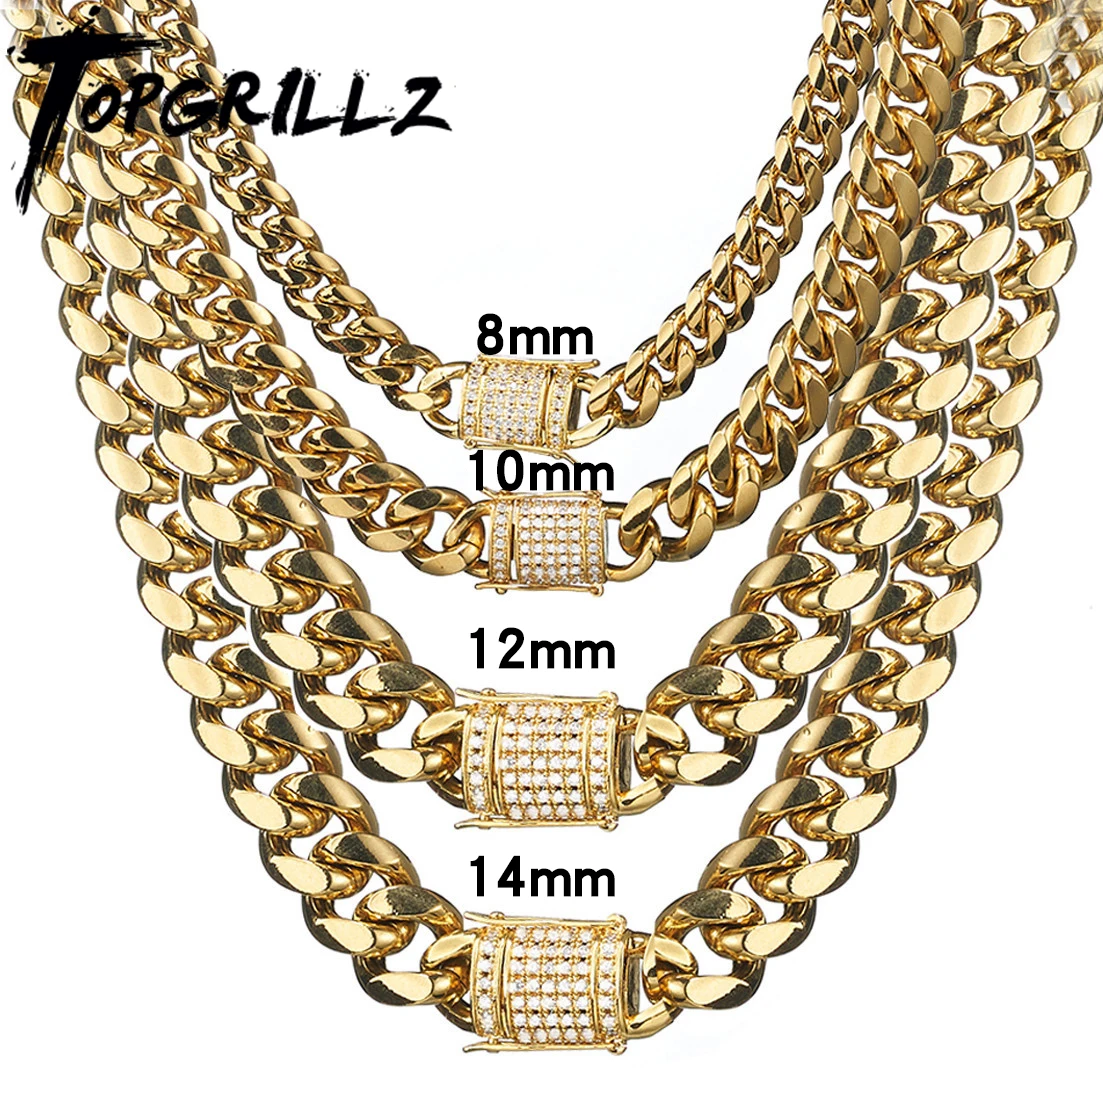 TOPGRILLZ Necklace Bracelet Set 8/10/12/14MM STAINLESS STEEL Gold Miami Cuban Curb Chain Hip Hop Fashion Jewelry Gift For Men